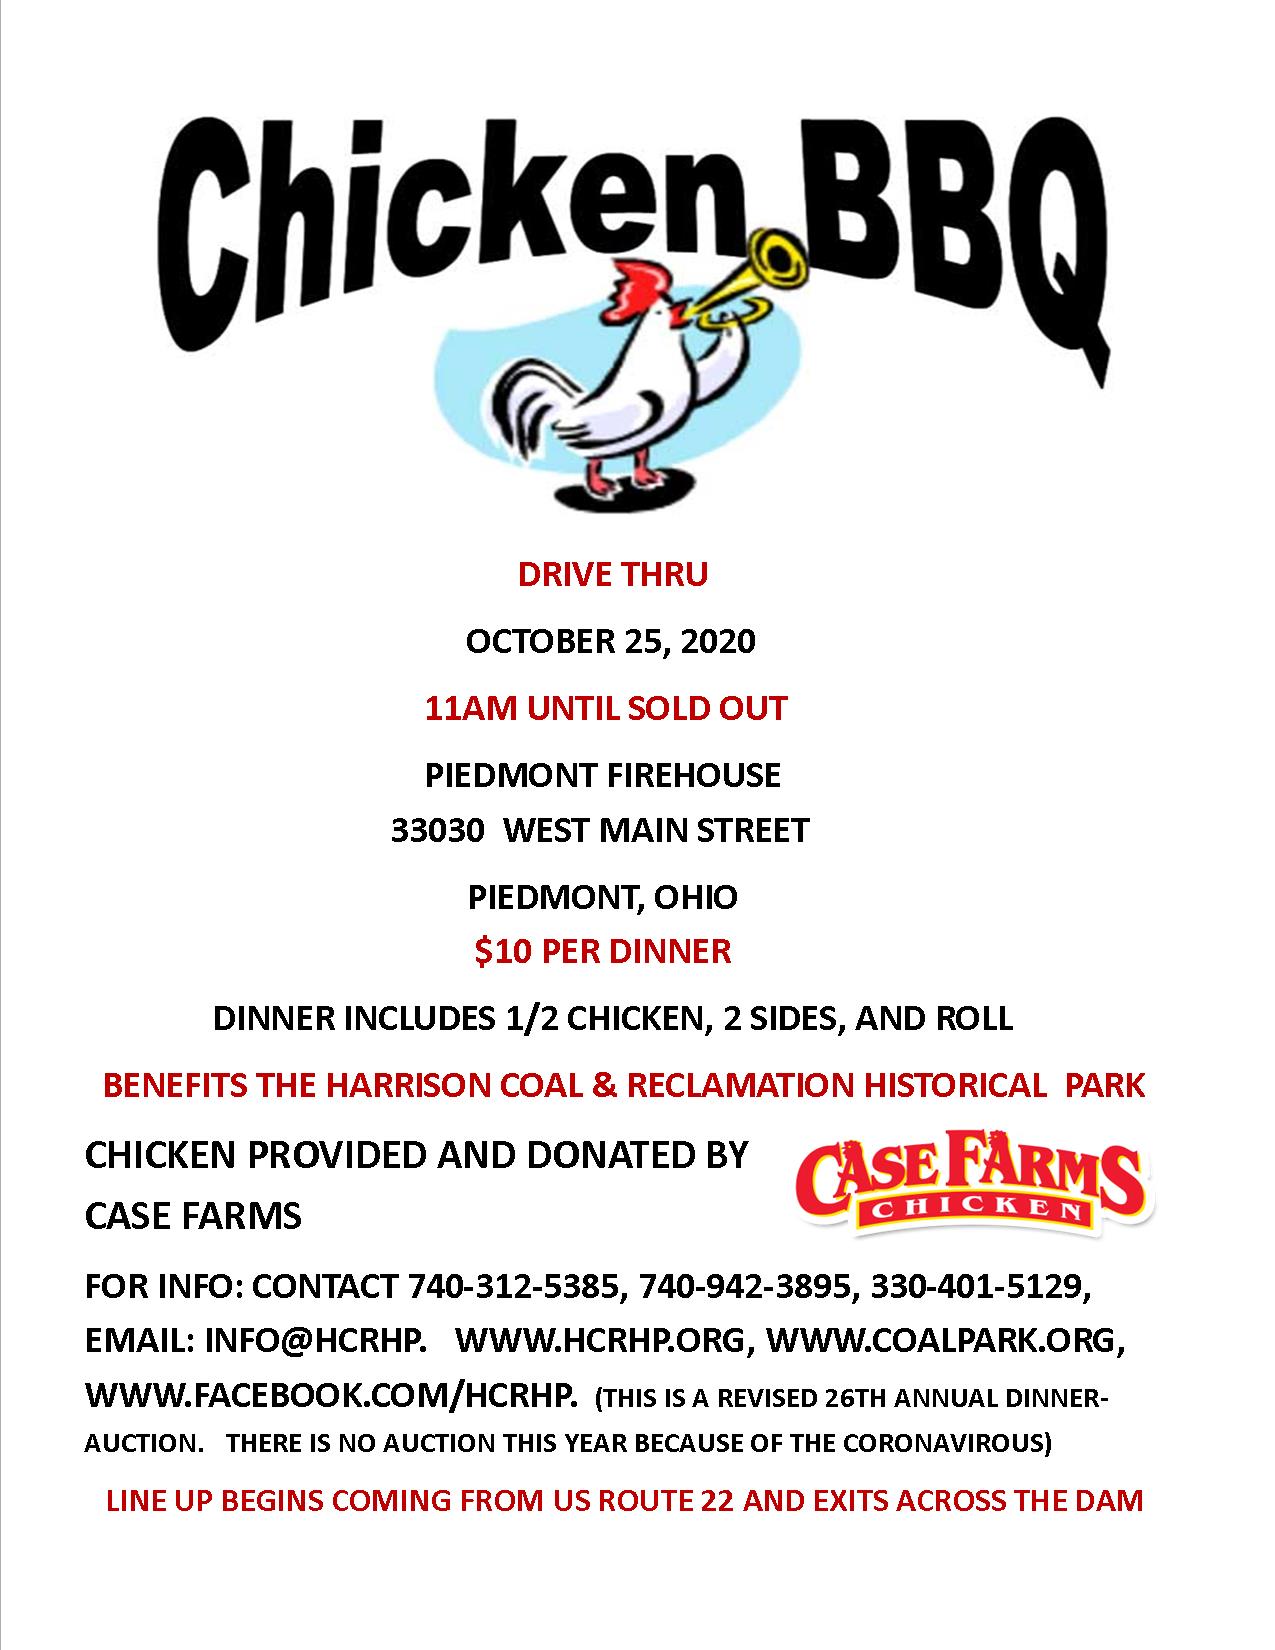 drive-thru-chicken-barbeque-revised-26th-annual-dinner-woub-public-media